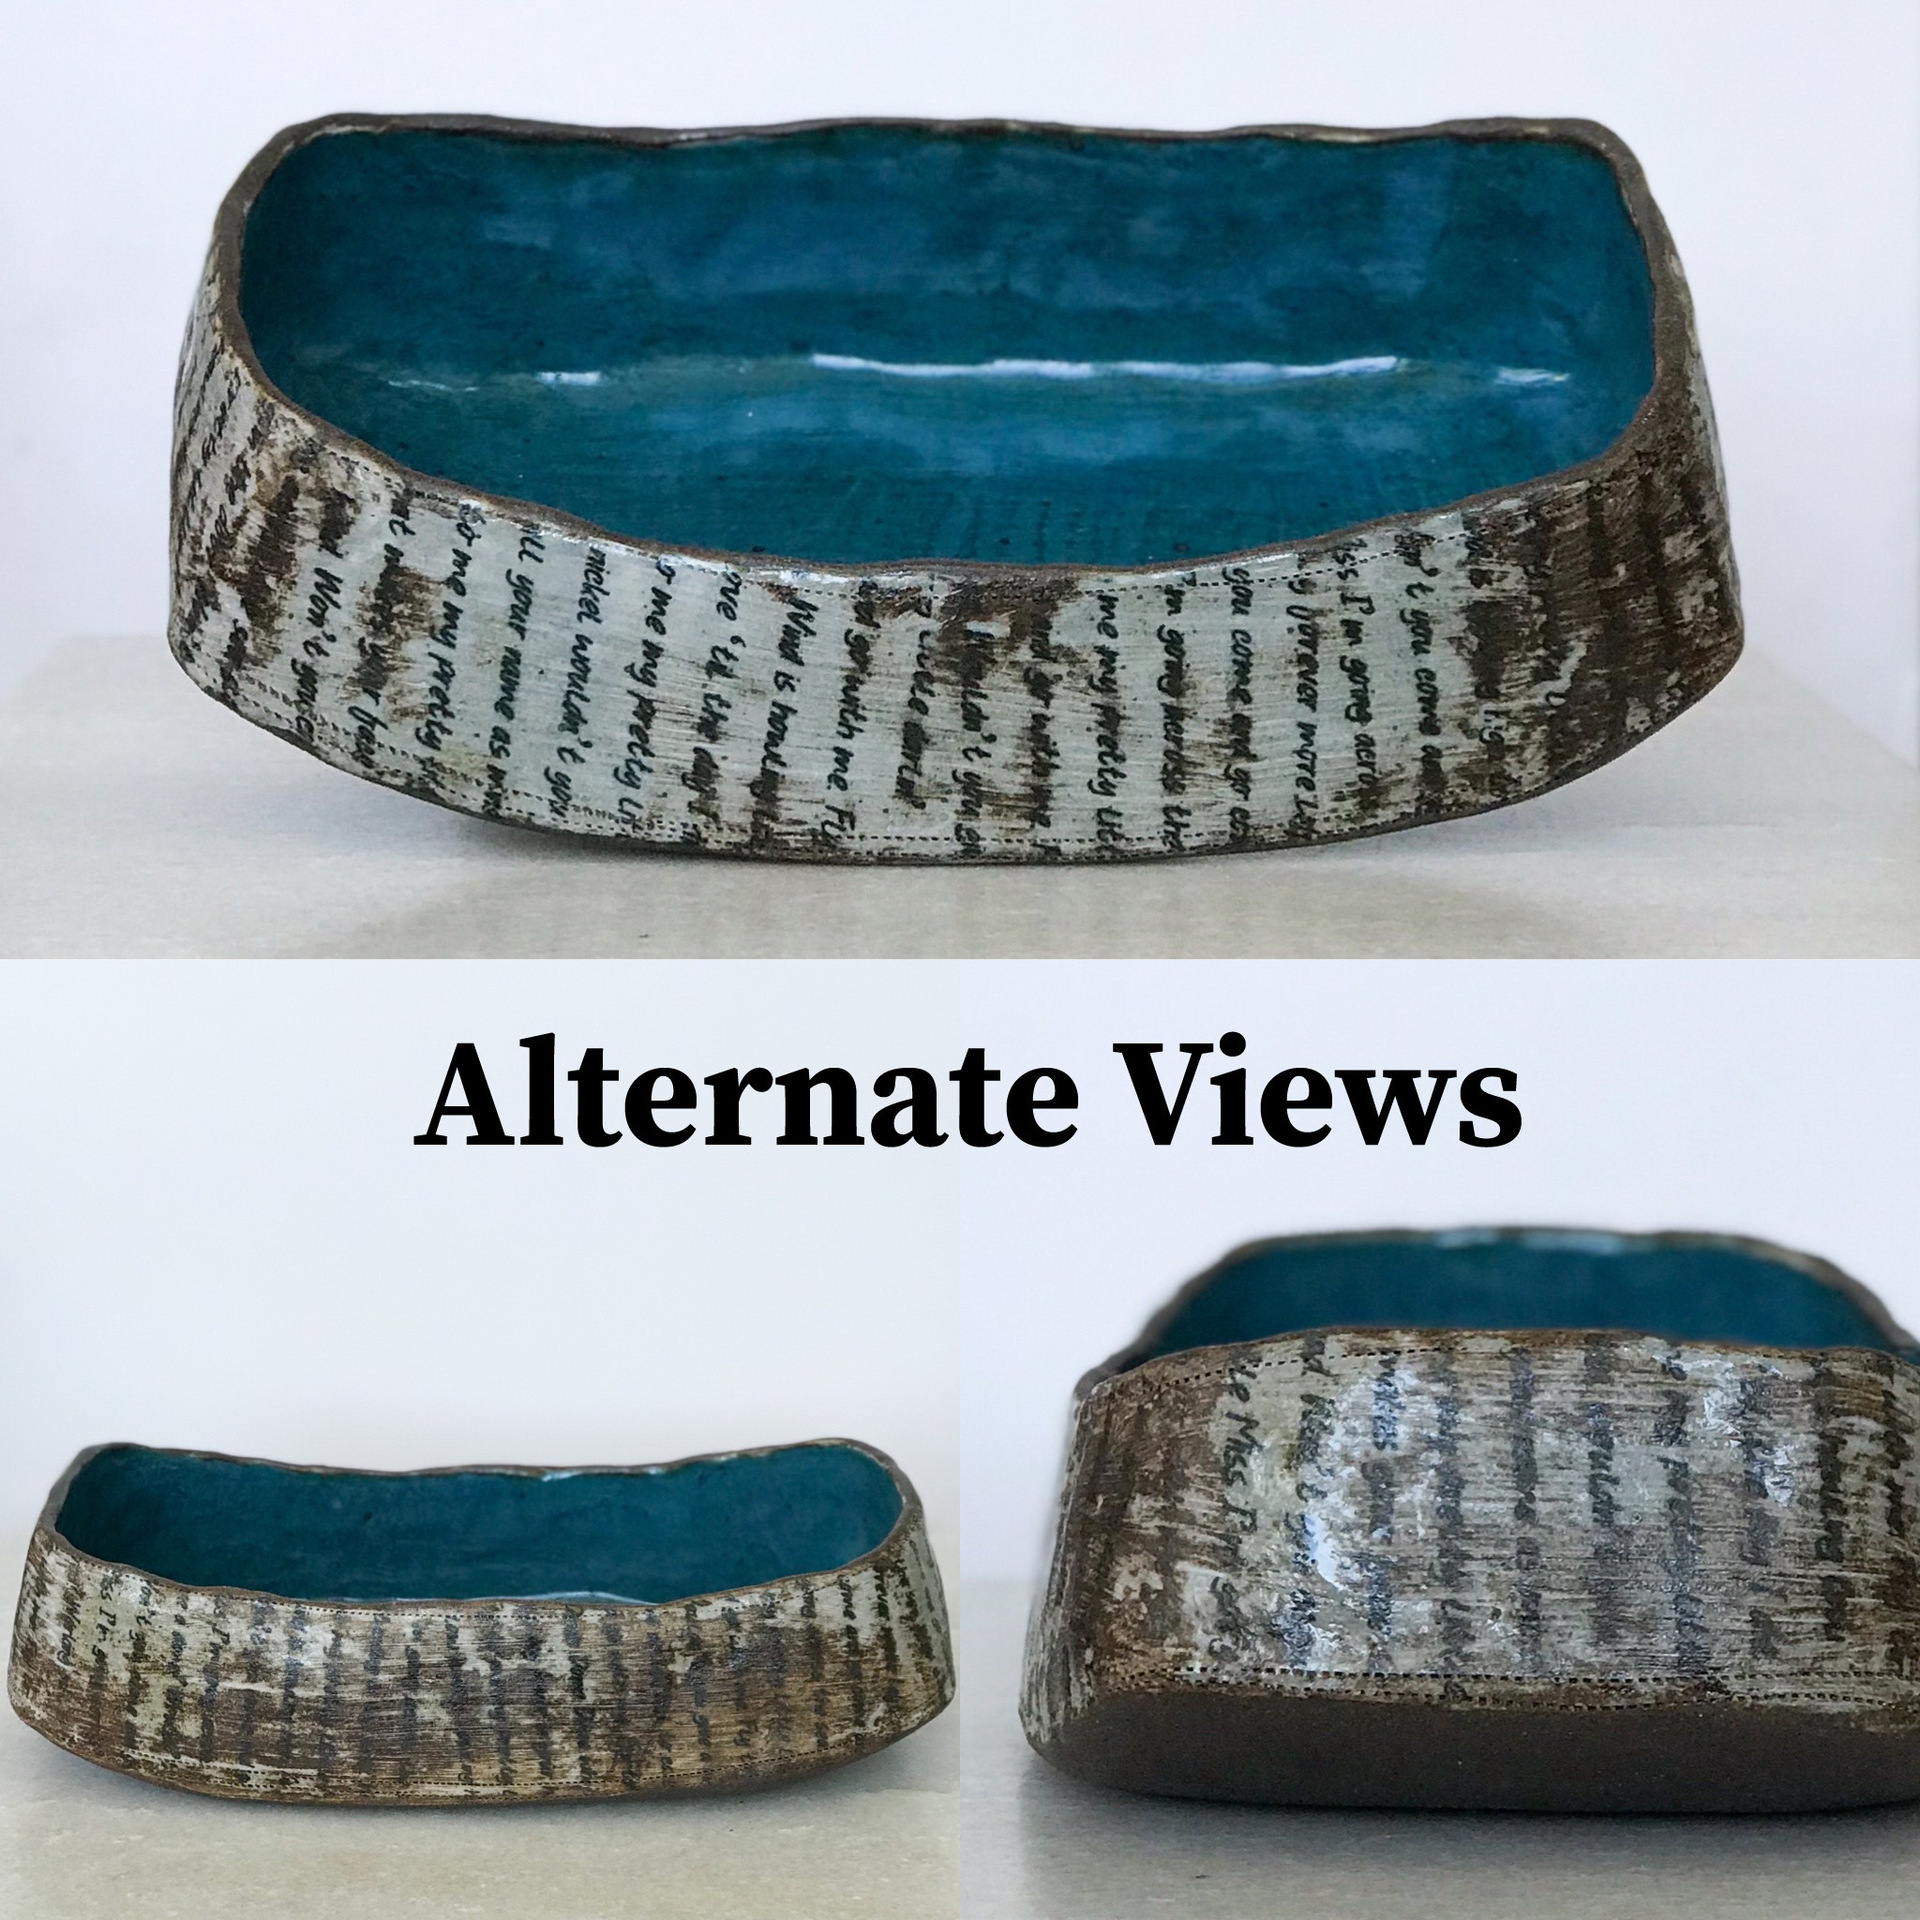  ceramic, organic square shaped bowl. Inside of bowl is blue and outside is light grey with brown texture similar to rust as well as small black words all over the outside of the bowl.